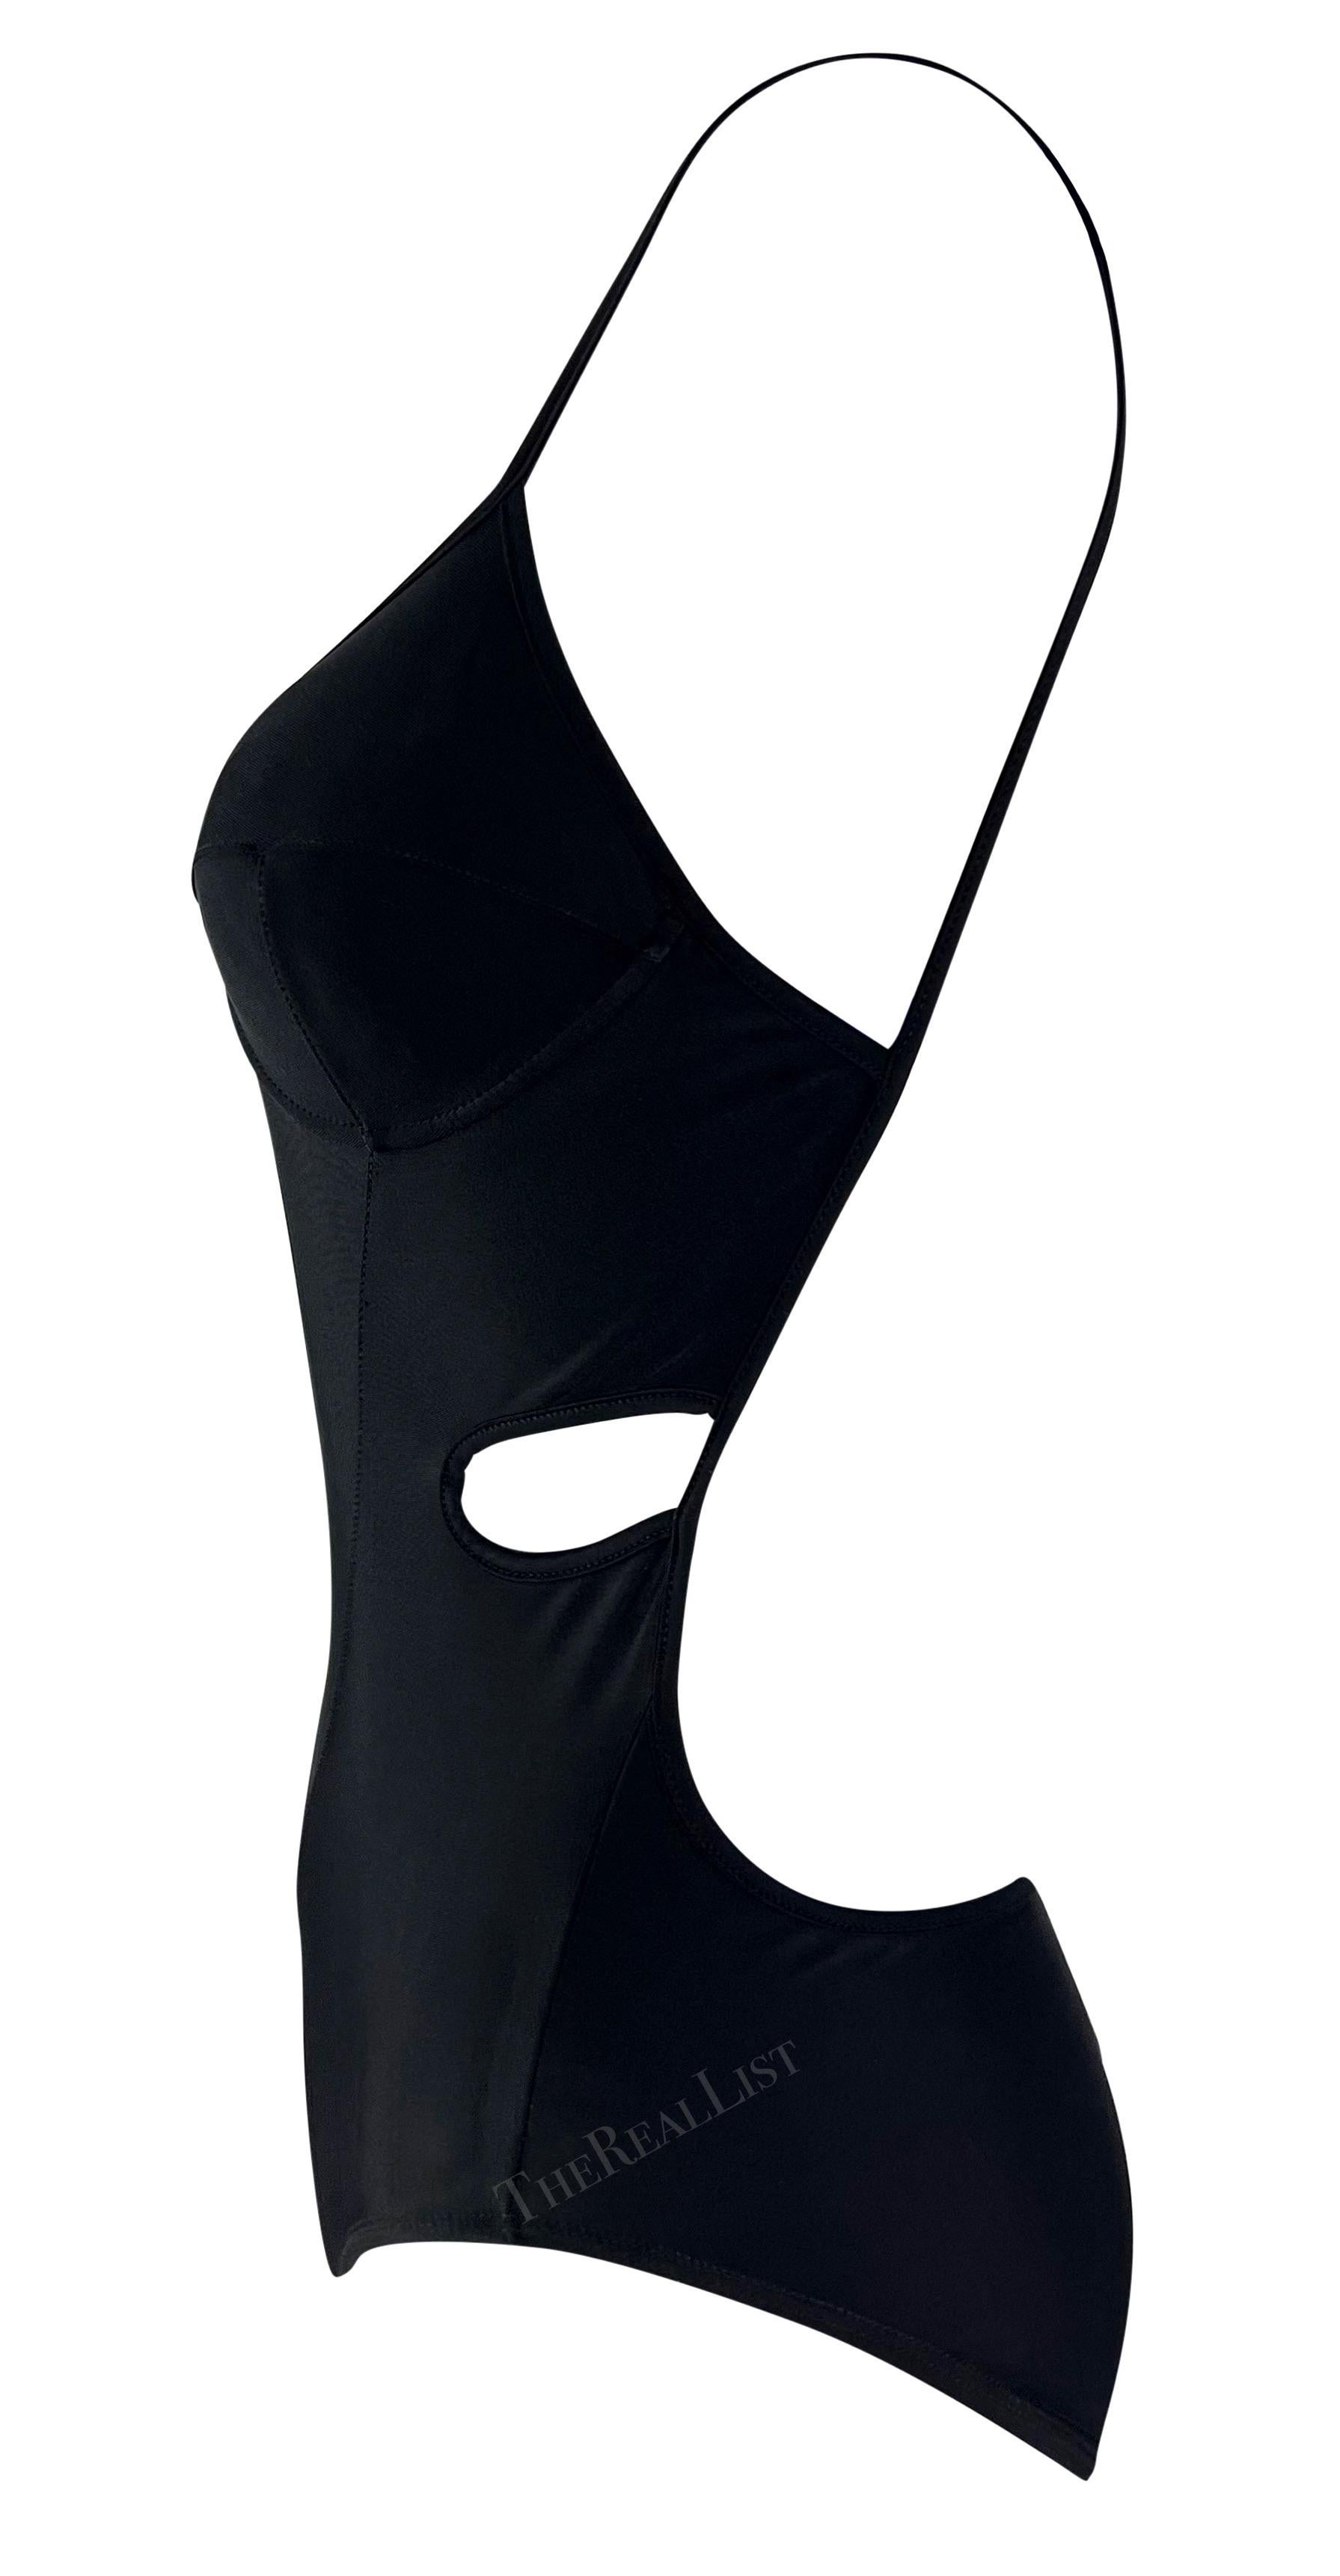 Early 1990s John Galliano Black Cut Out One Piece Swimsuit/Bodysuit For Sale 2